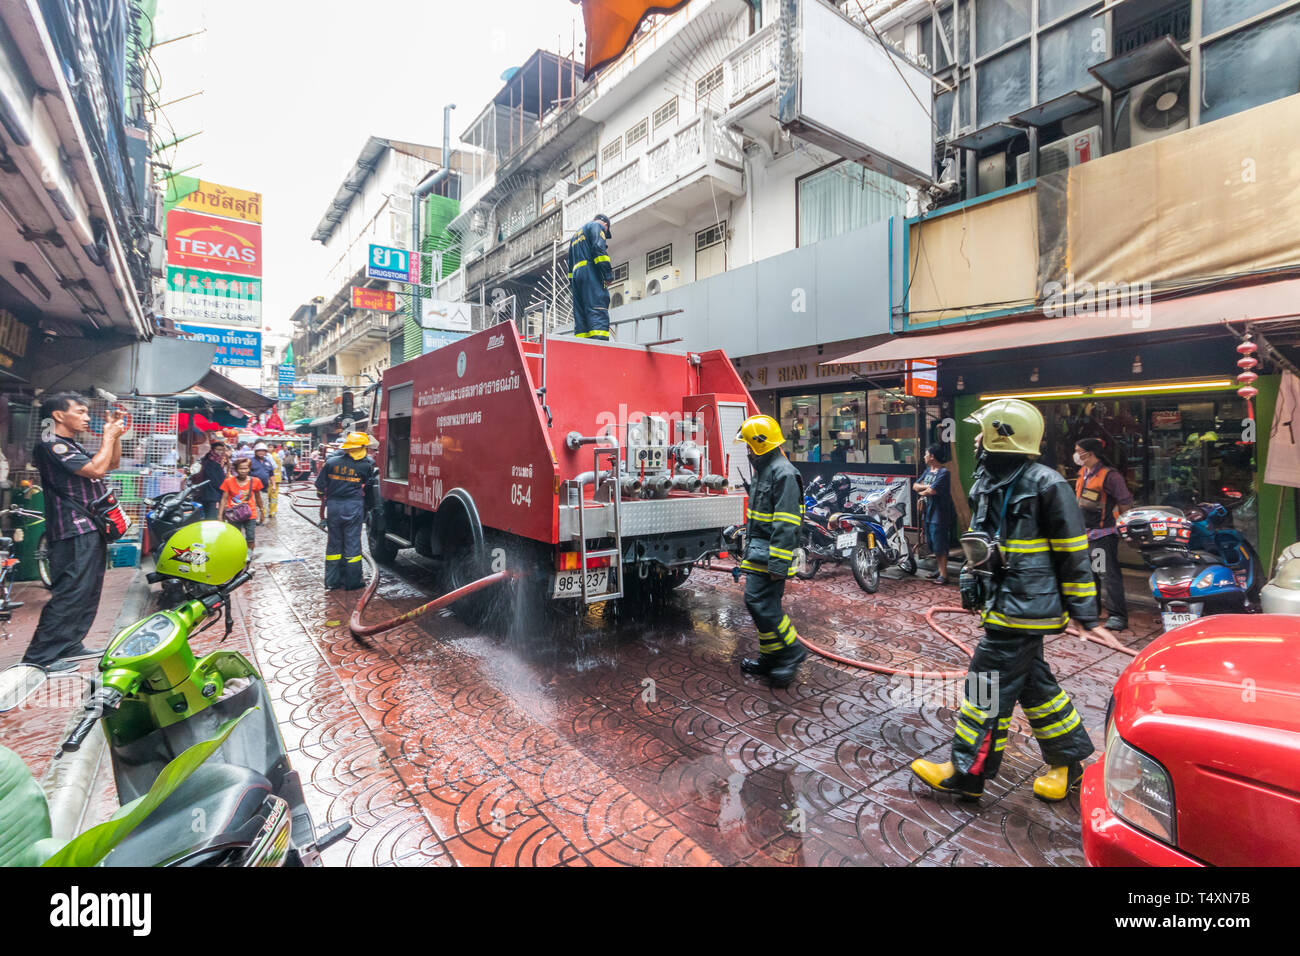 Bangkok, Thailand - January 31st 2019: Firefighters attending a fire in Chinatown. Fires are potentially very dangerous due to the close proximity of  Stock Photo